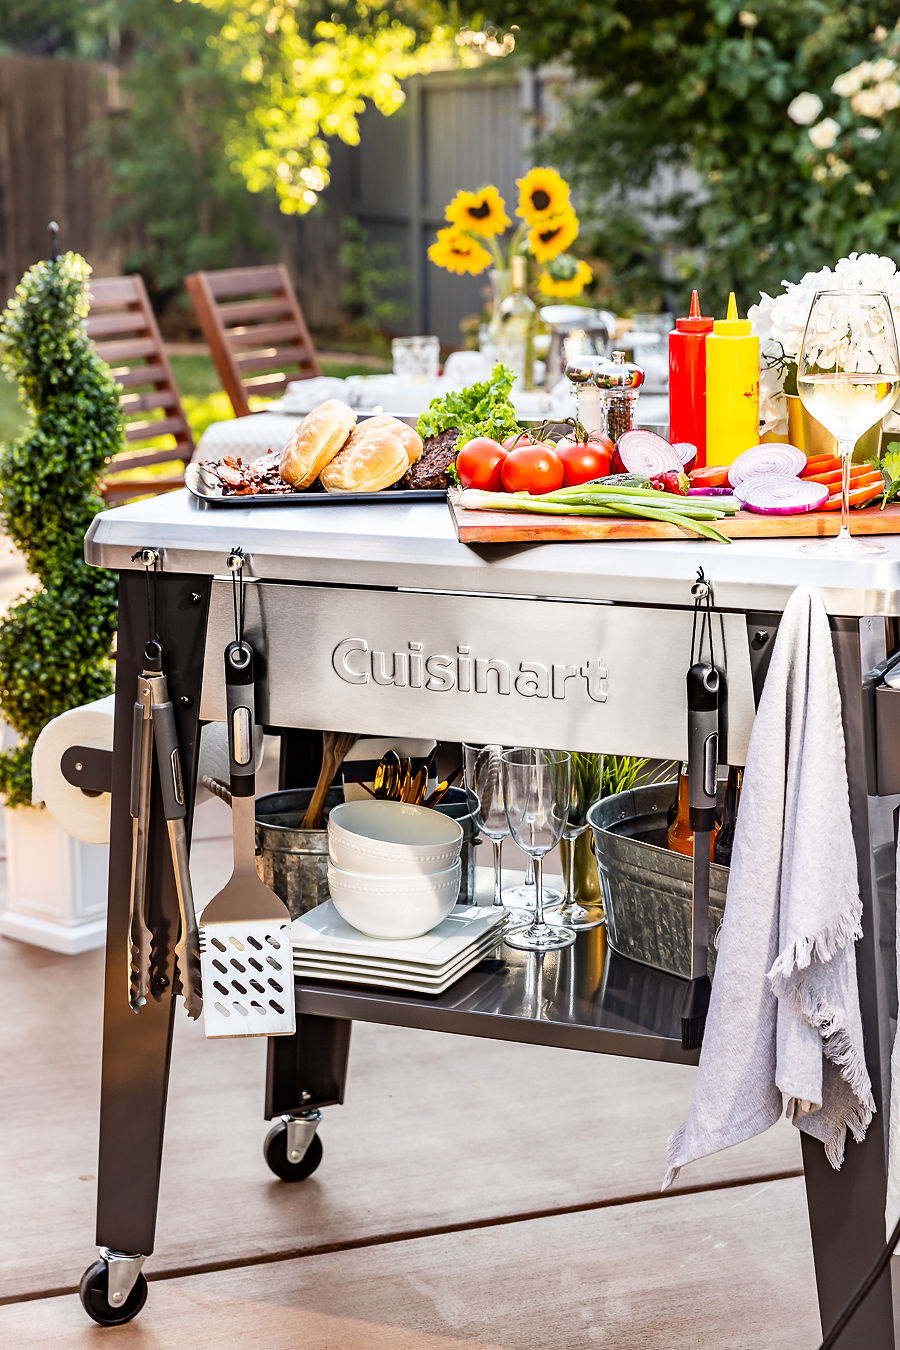 Cuisinart Stainless Steel Outdoor Prep Table - image 3 of 8